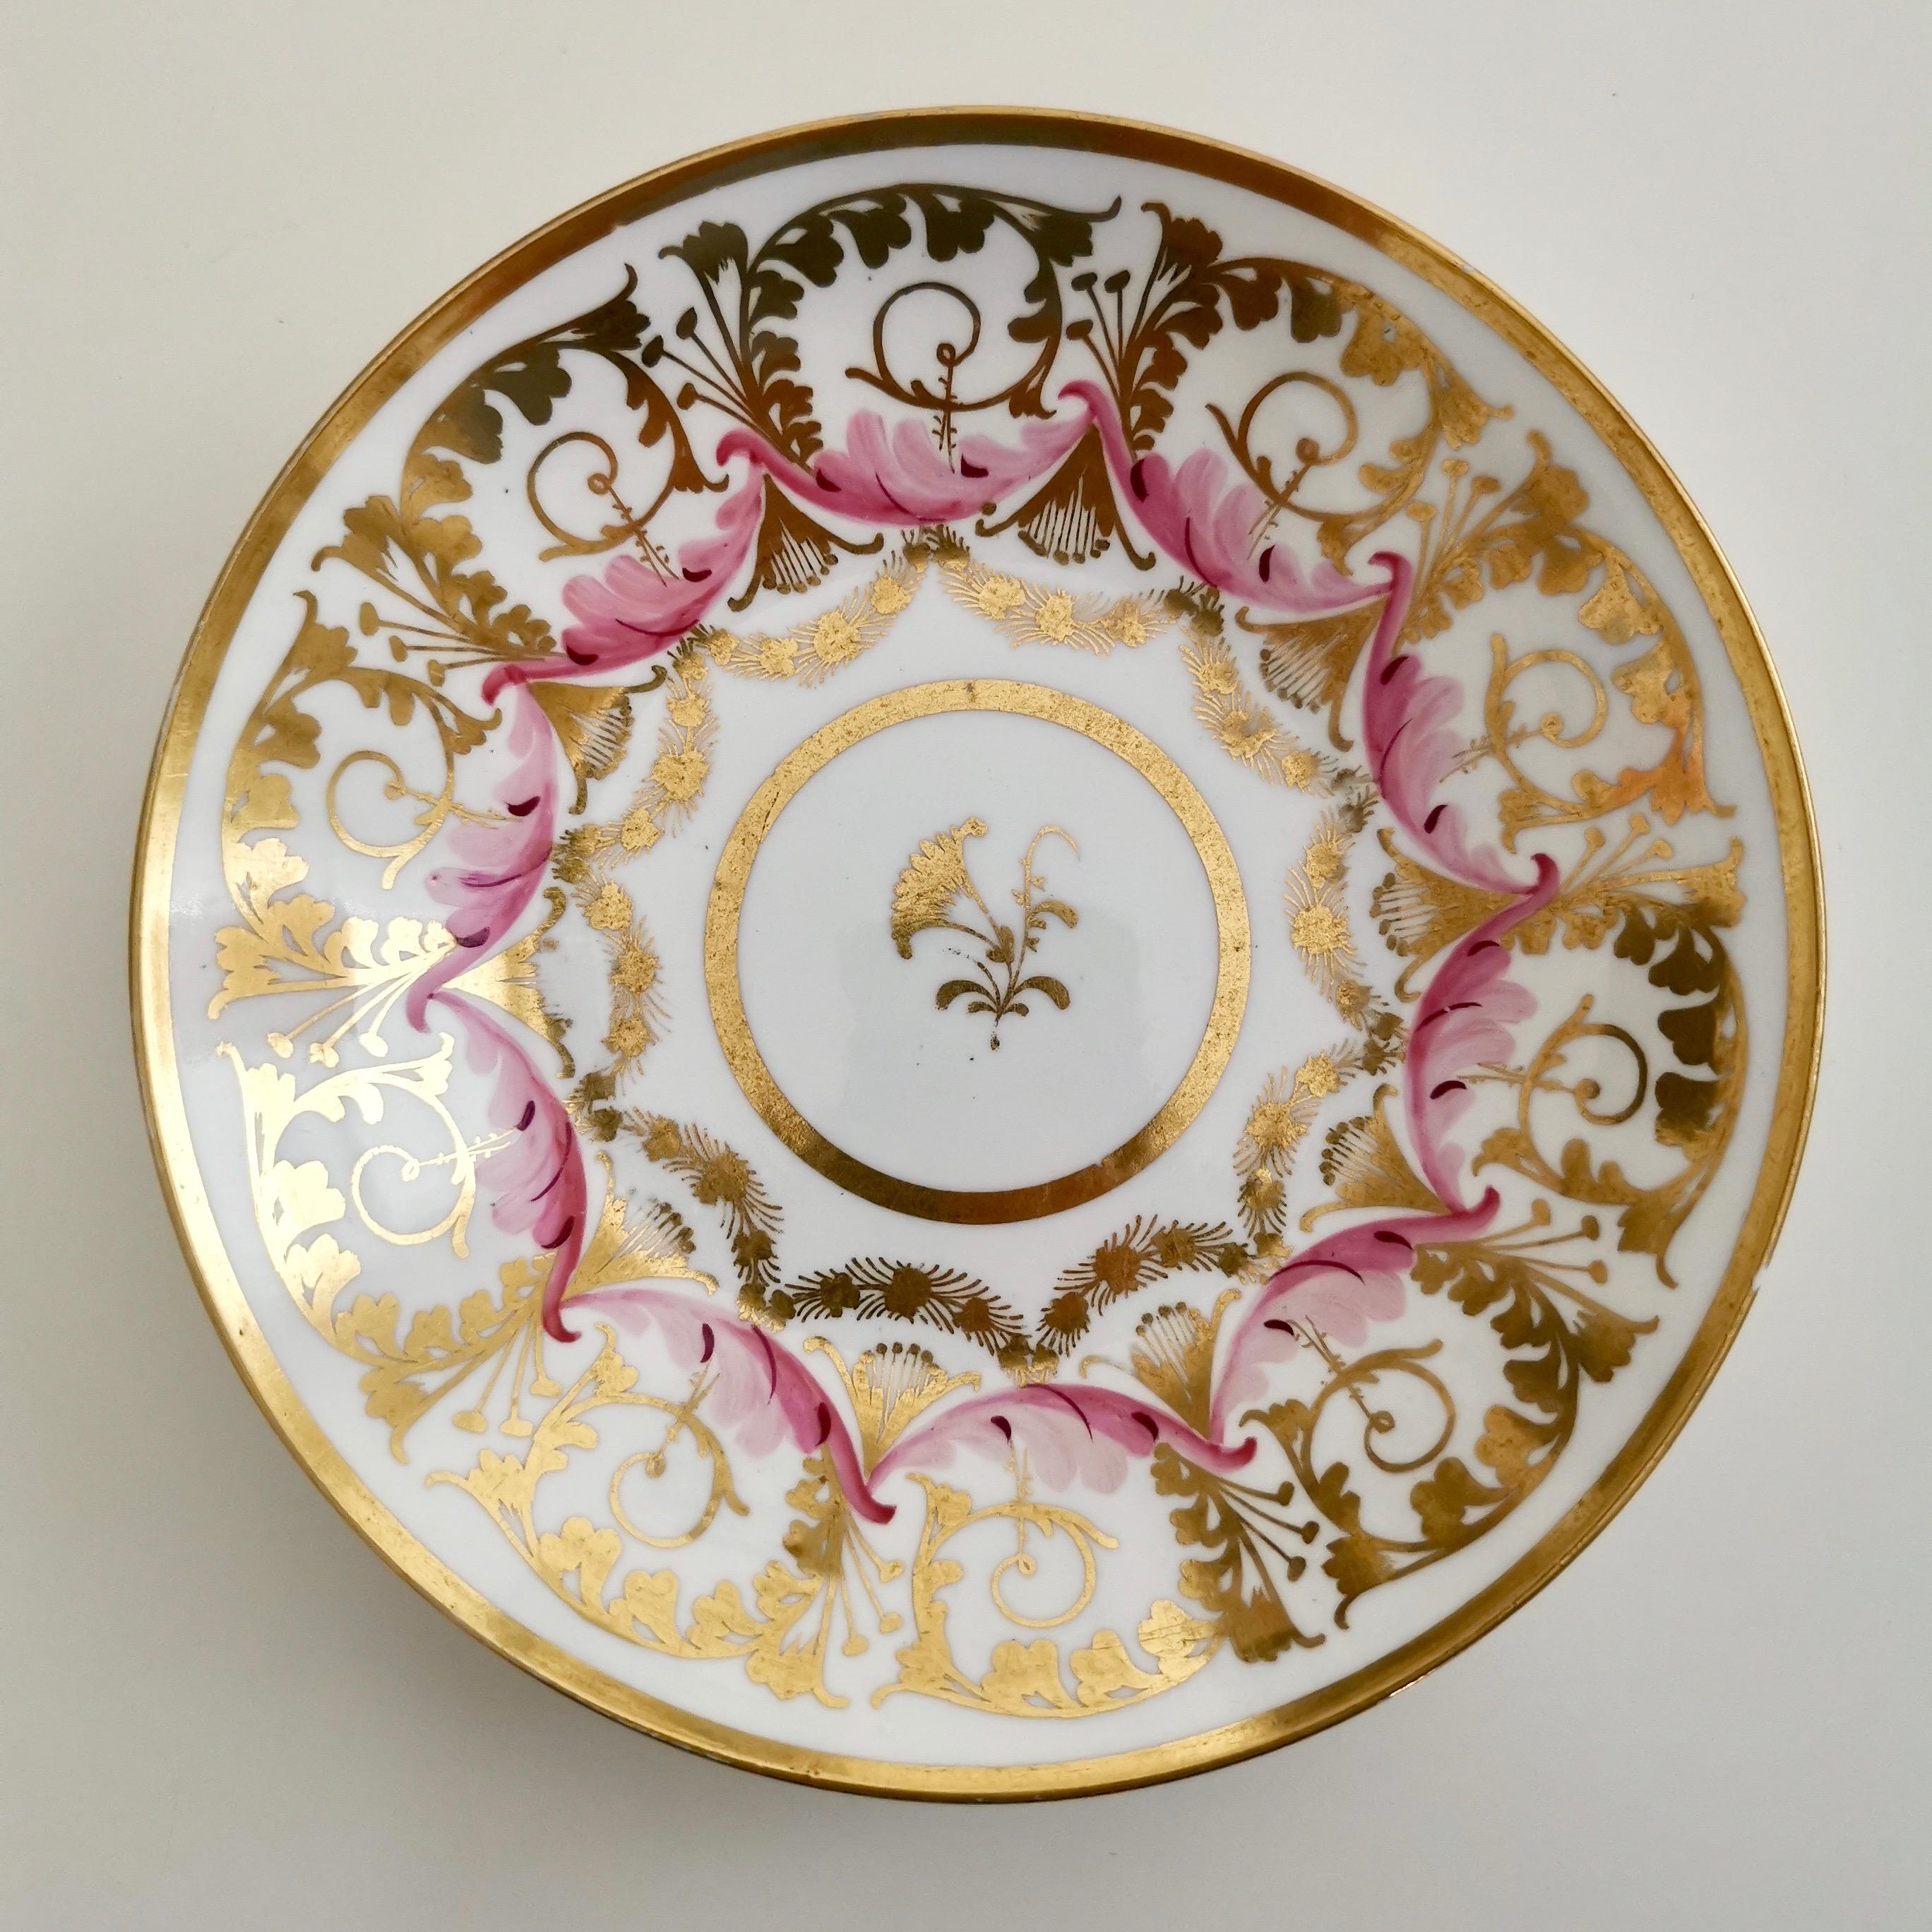 New Hall Cup and Saucer, Gilt and Pink Sprigs, Regency, 1815-1820 1